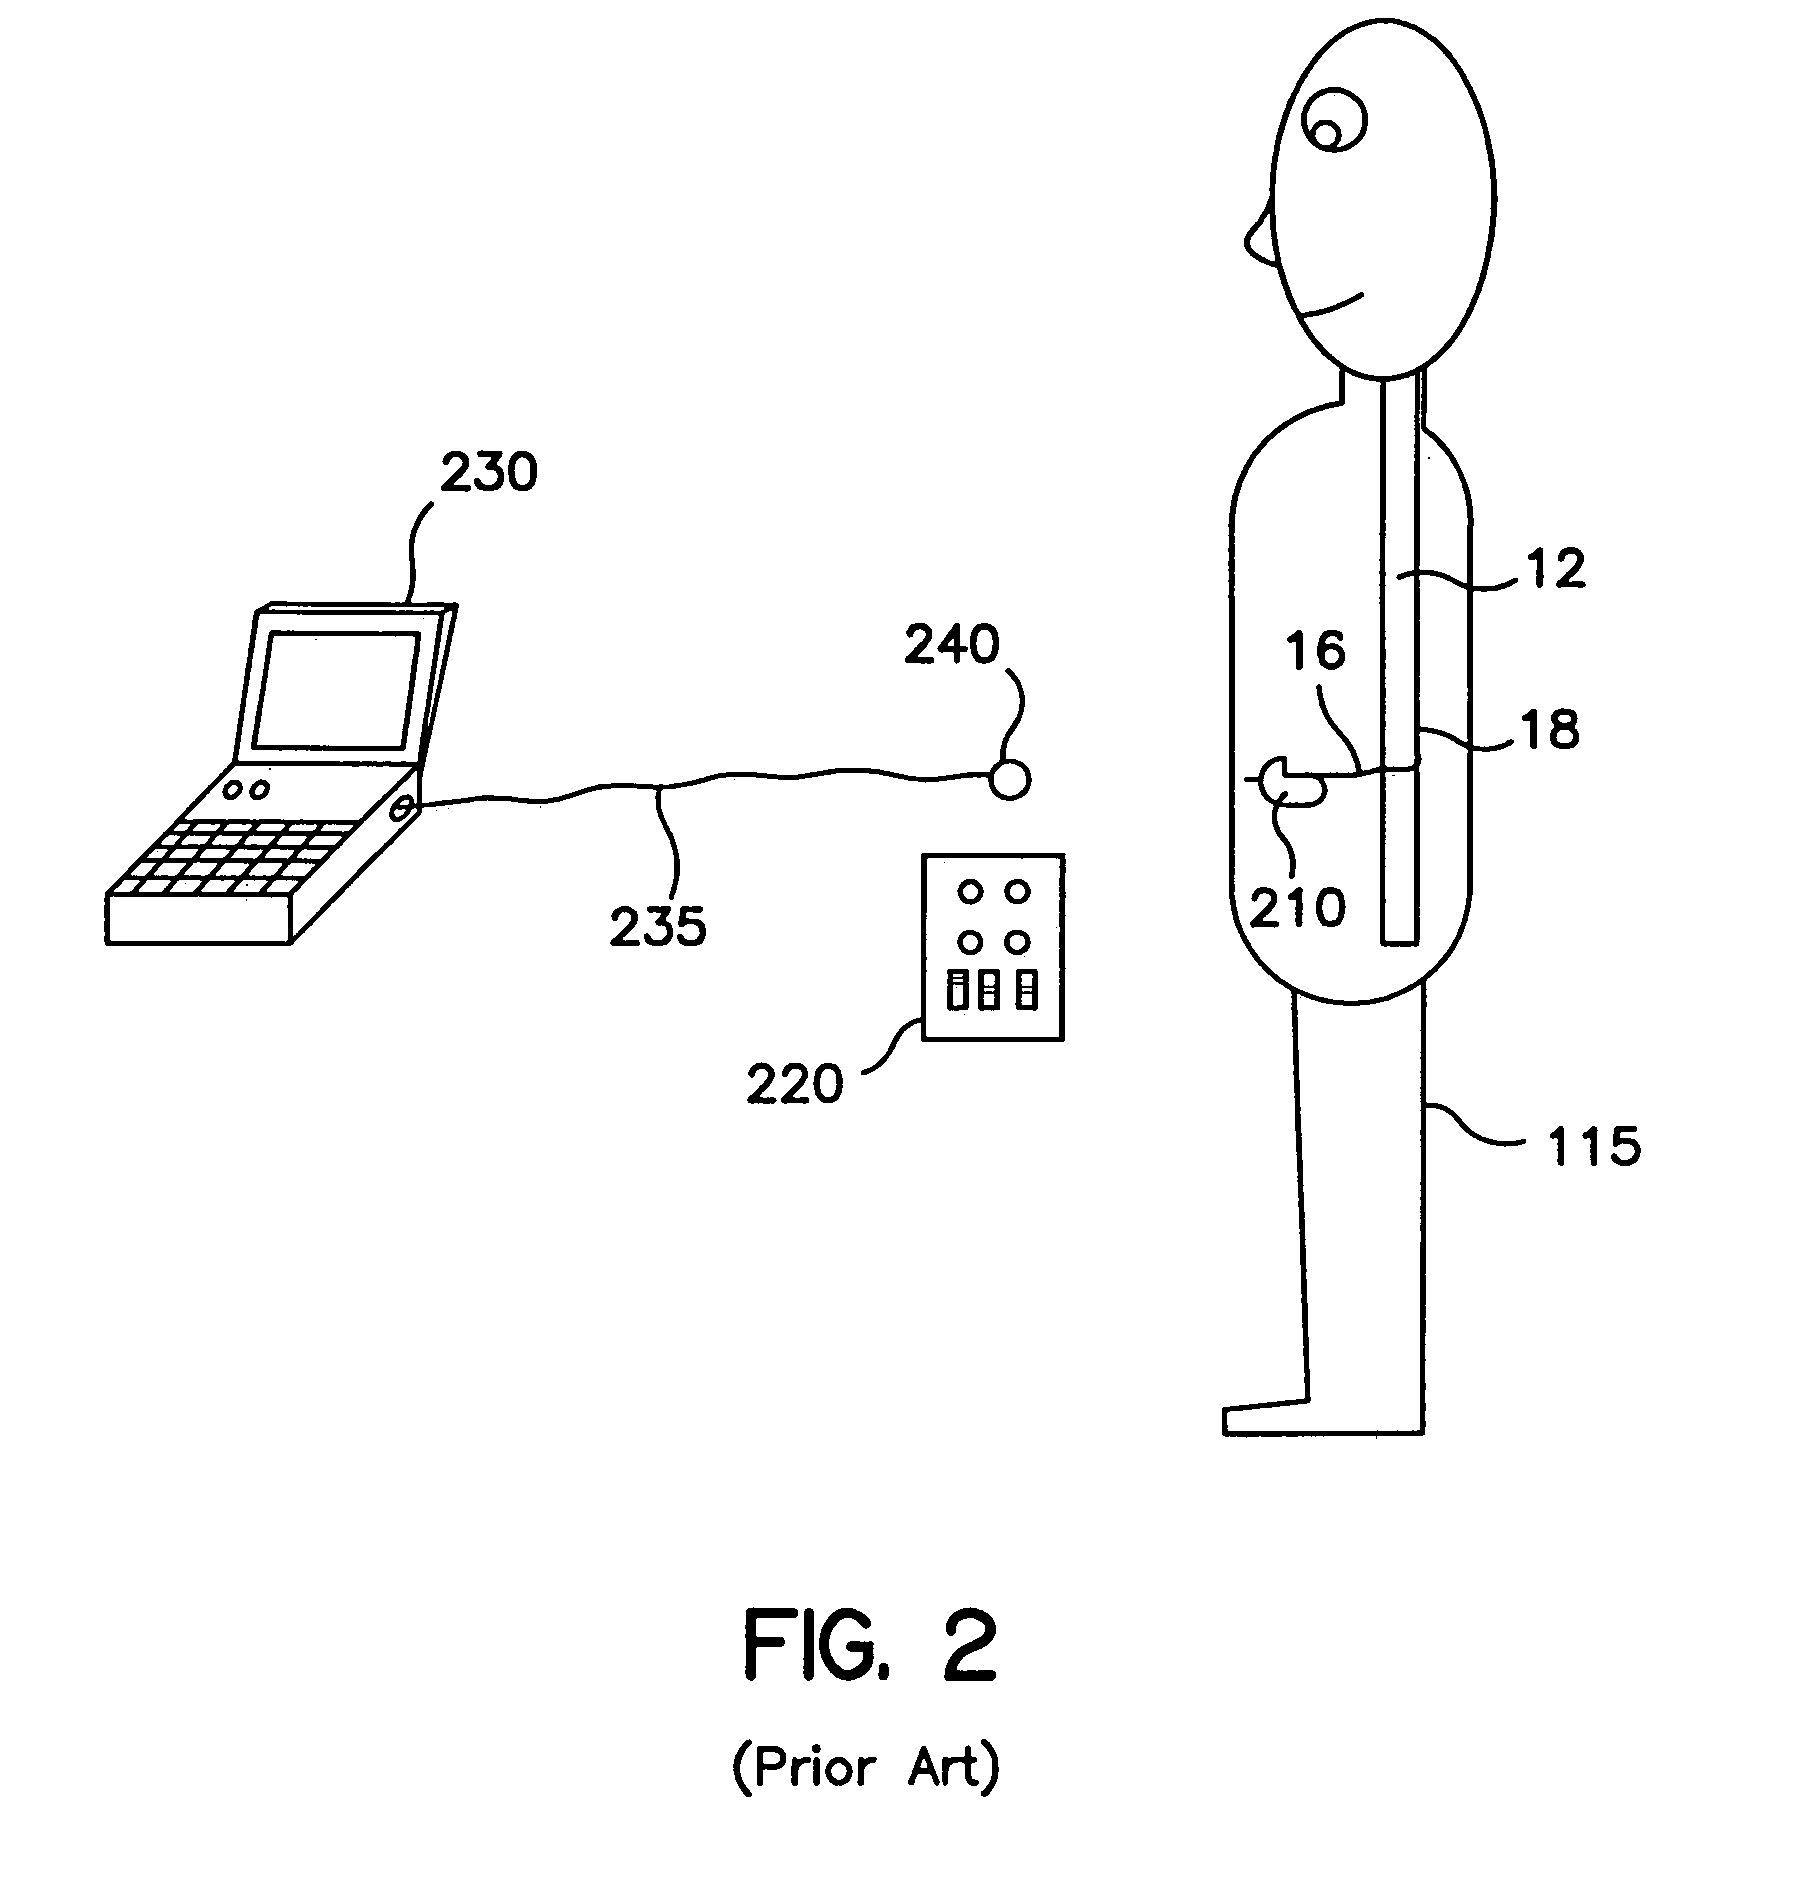 Method and apparatus for programming an implantable medical device